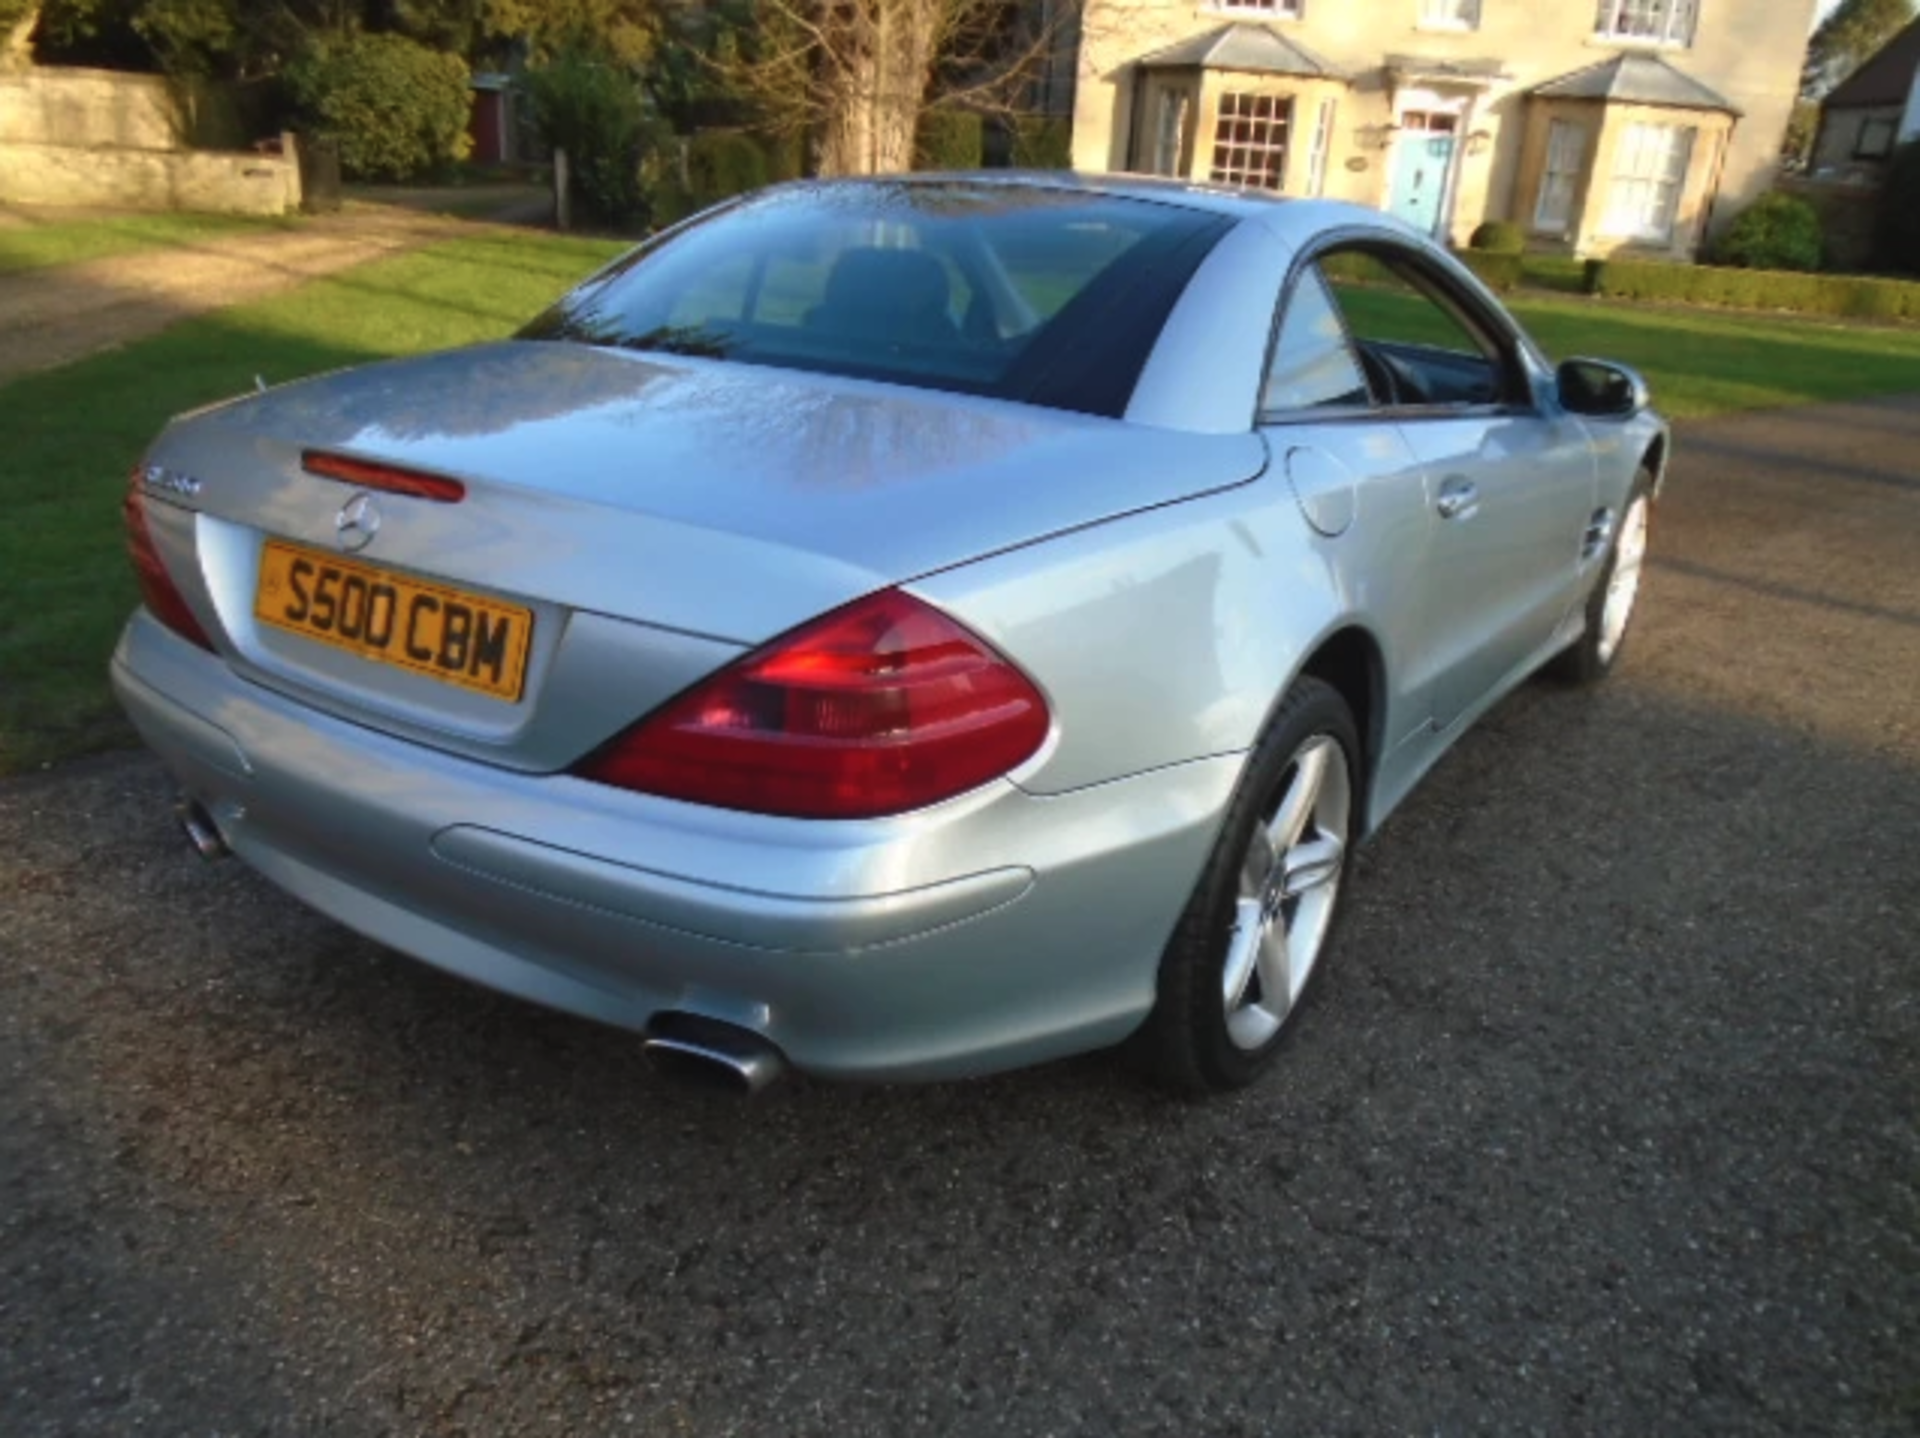 2003 Mercedes 500SL Convertible - Image 3 of 6